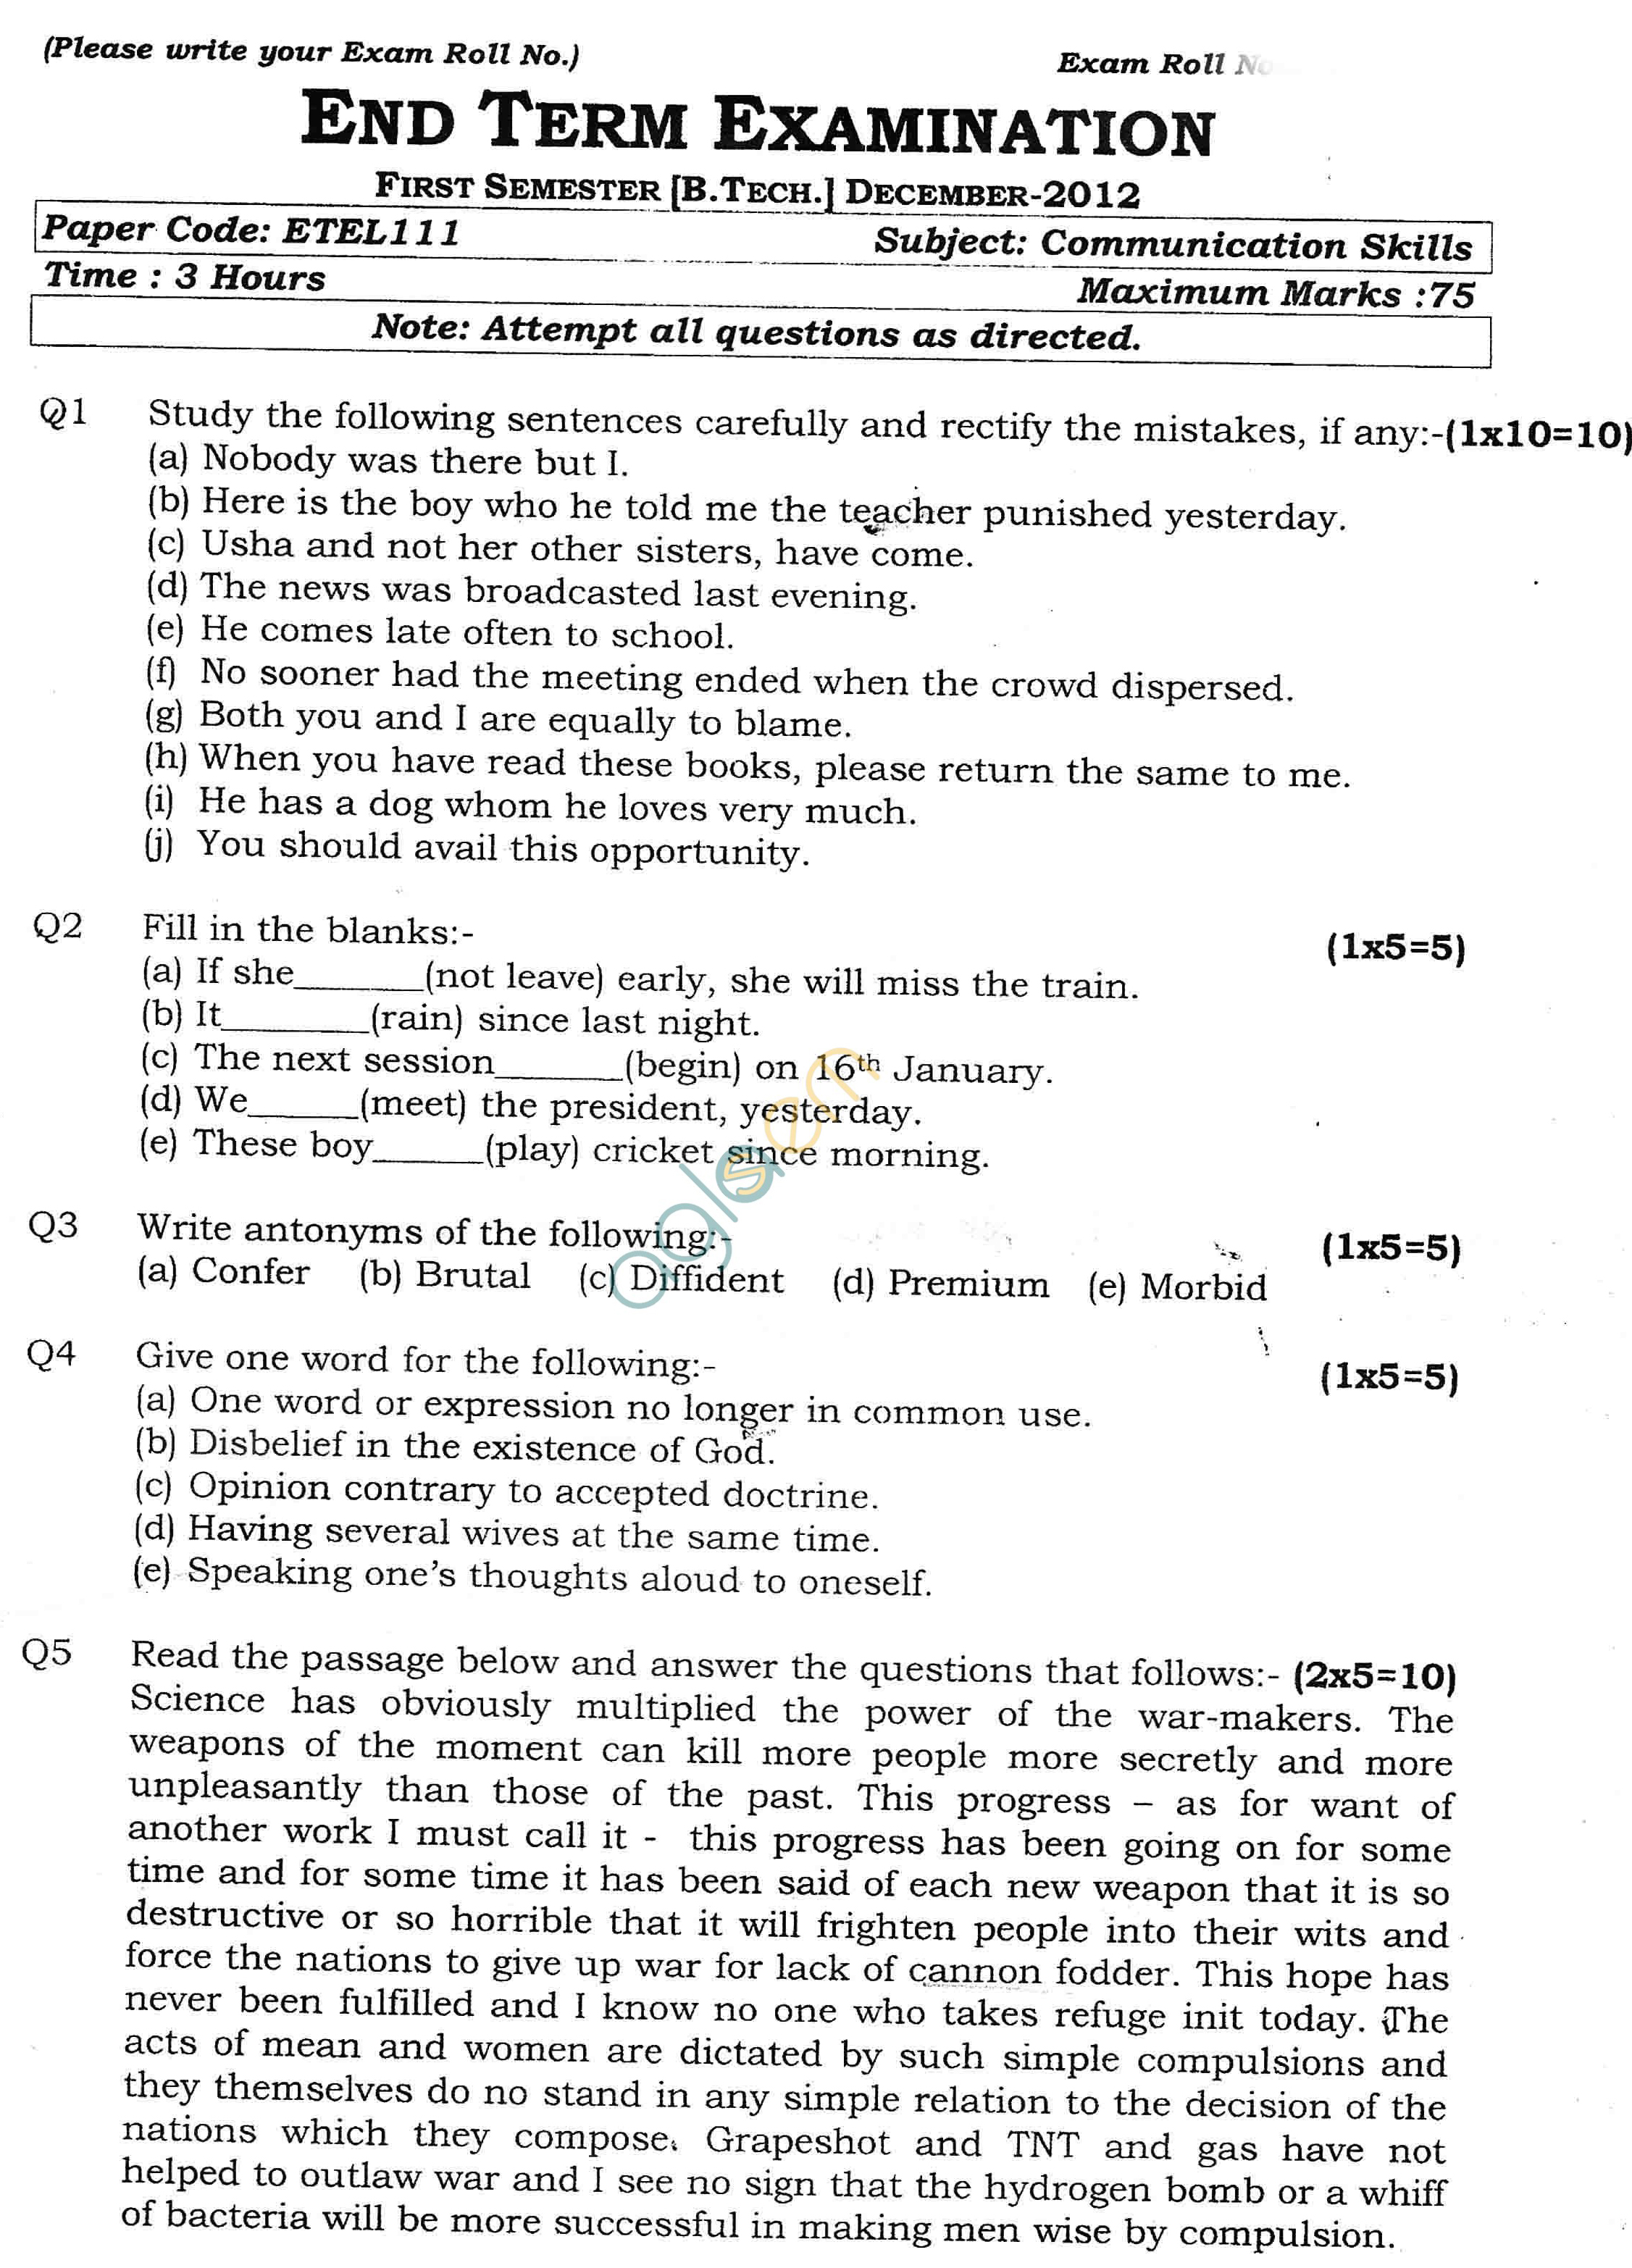 GGSIPU: Question Papers First Semester – end Term 2012 – ETEL-111